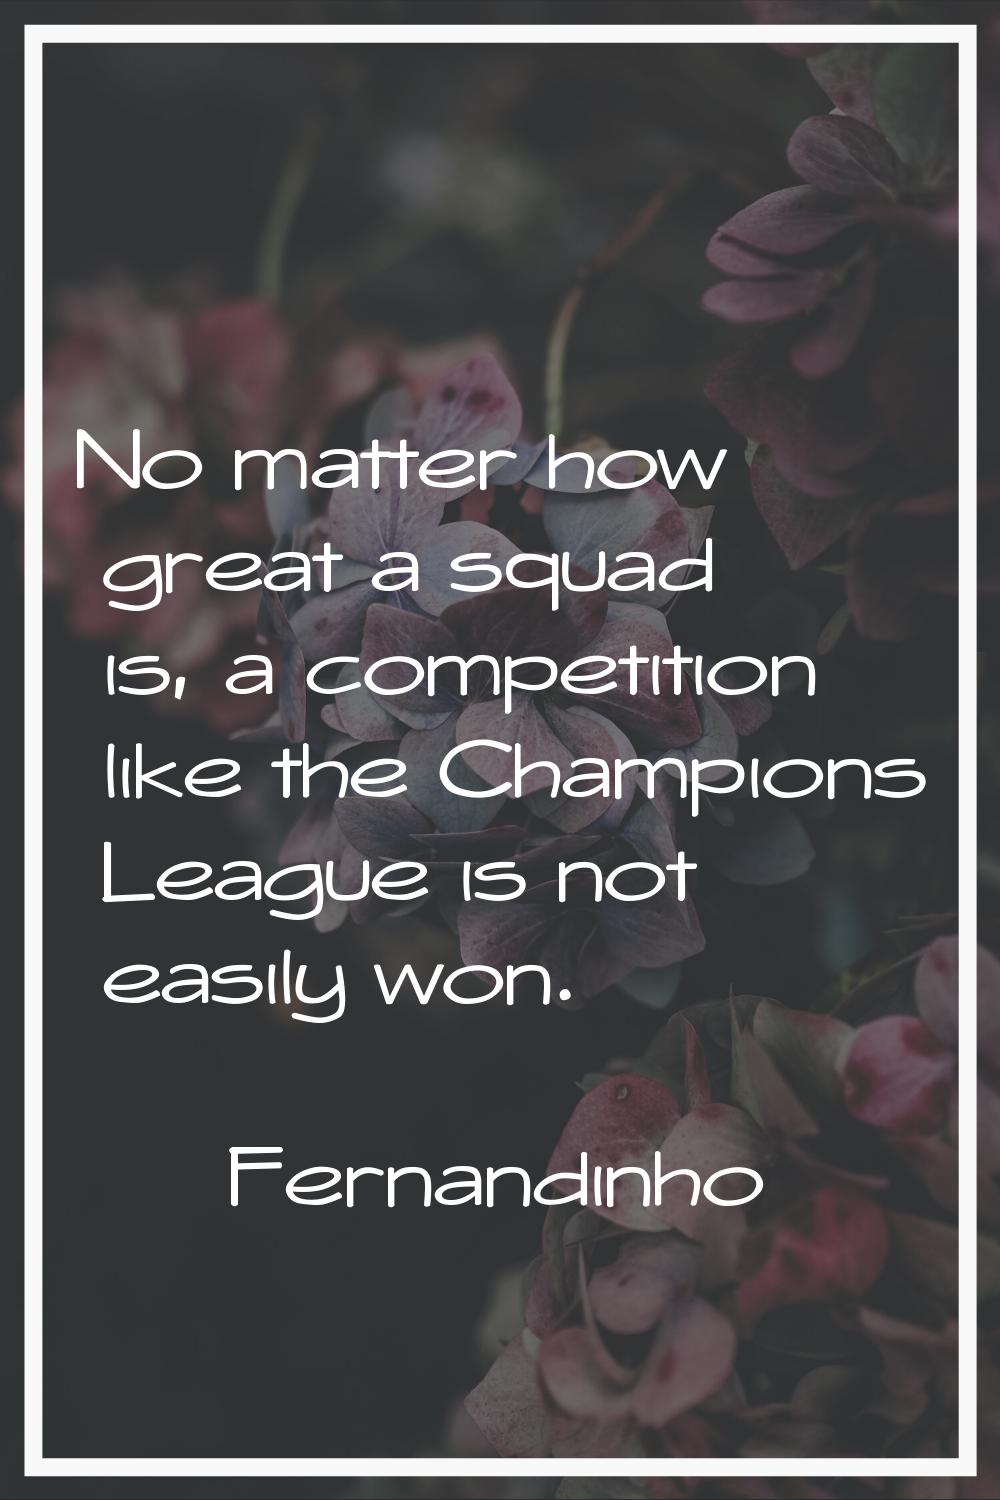 No matter how great a squad is, a competition like the Champions League is not easily won.